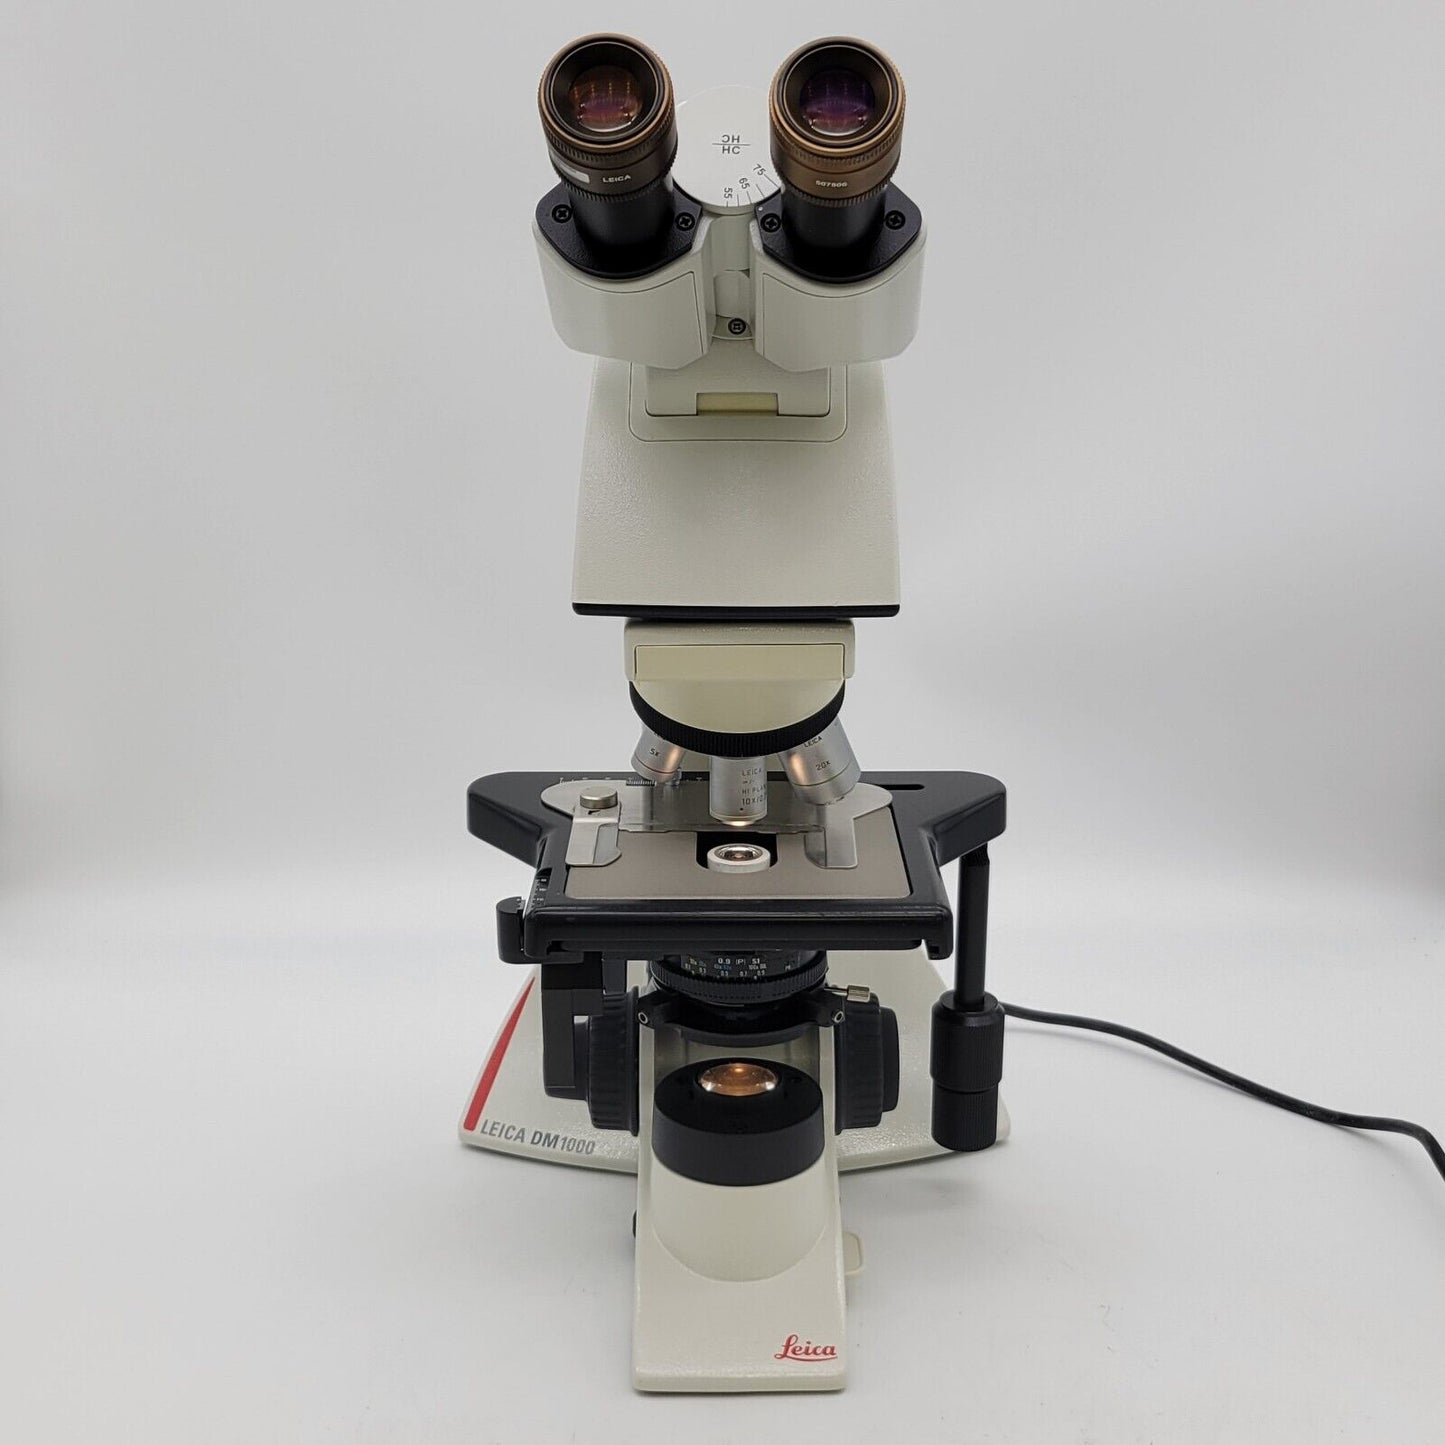 Leica Microscope DM1000 with Tilting Head & 2.5x Objective for Pathology / Mohs - microscopemarketplace